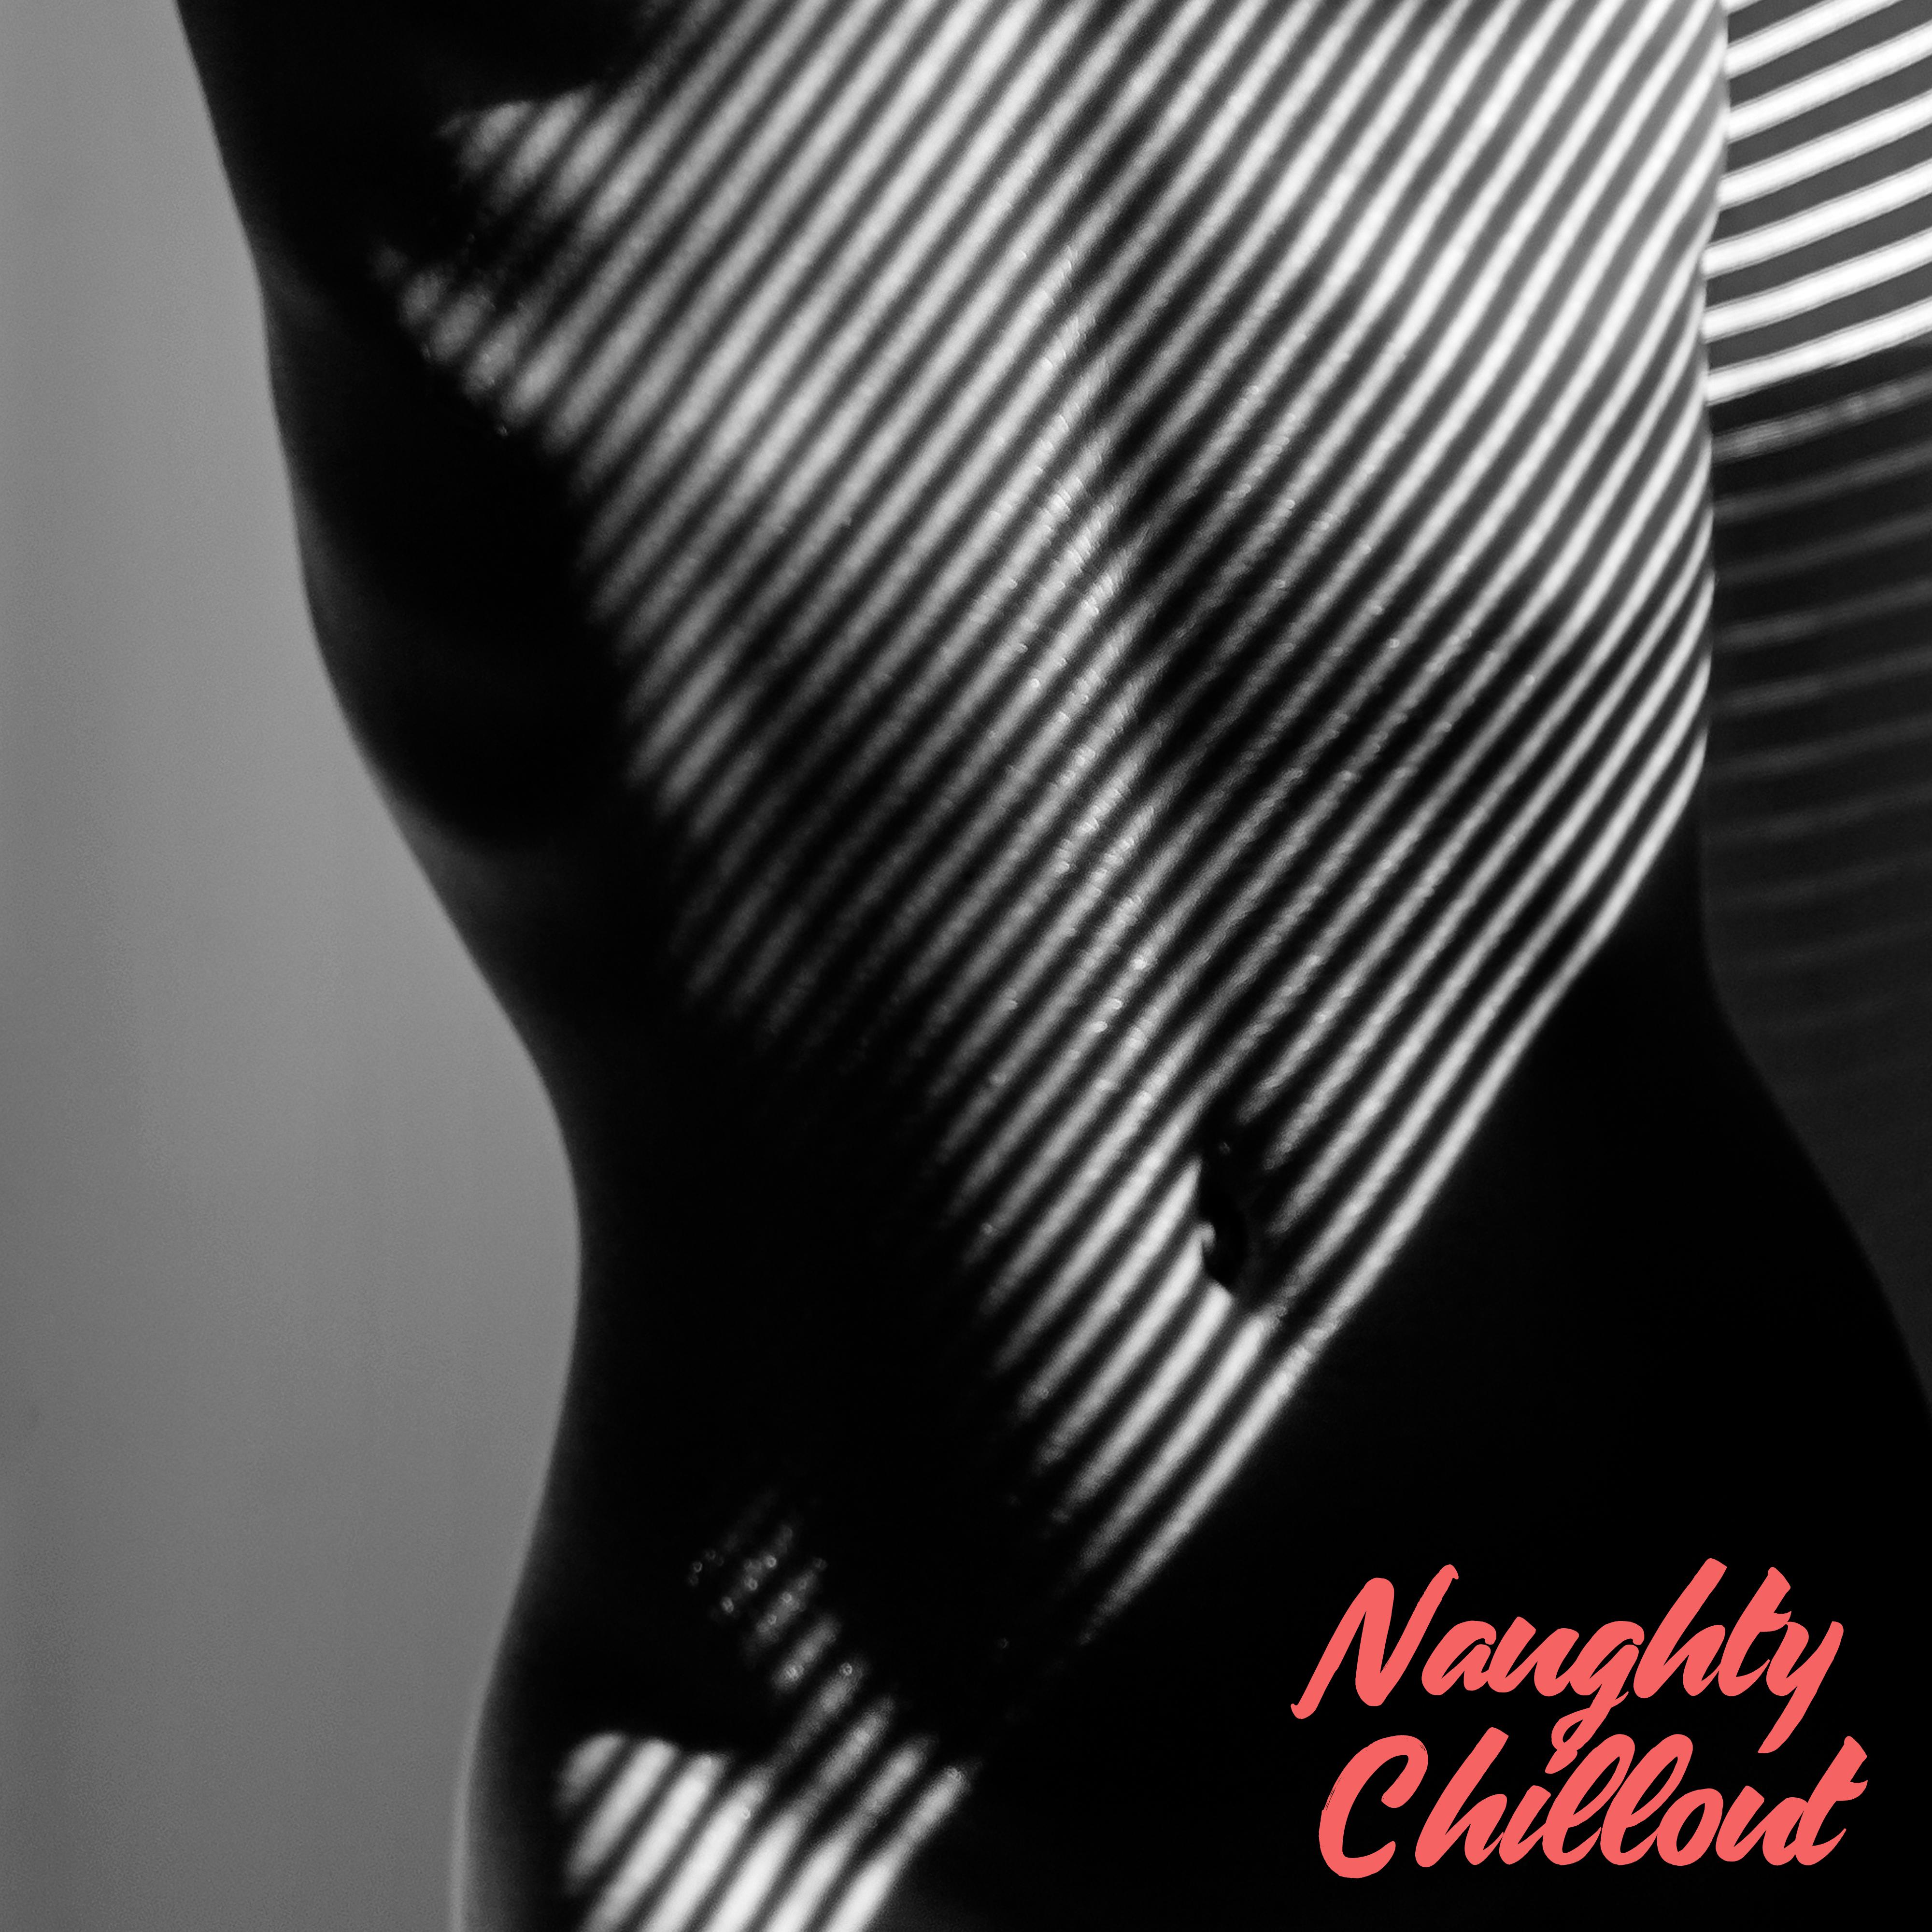 Naughty Chillout: Music Full of Eroticism and *** for Couples and Lovers, Sensual, Seductive and **** Chillout Melodies